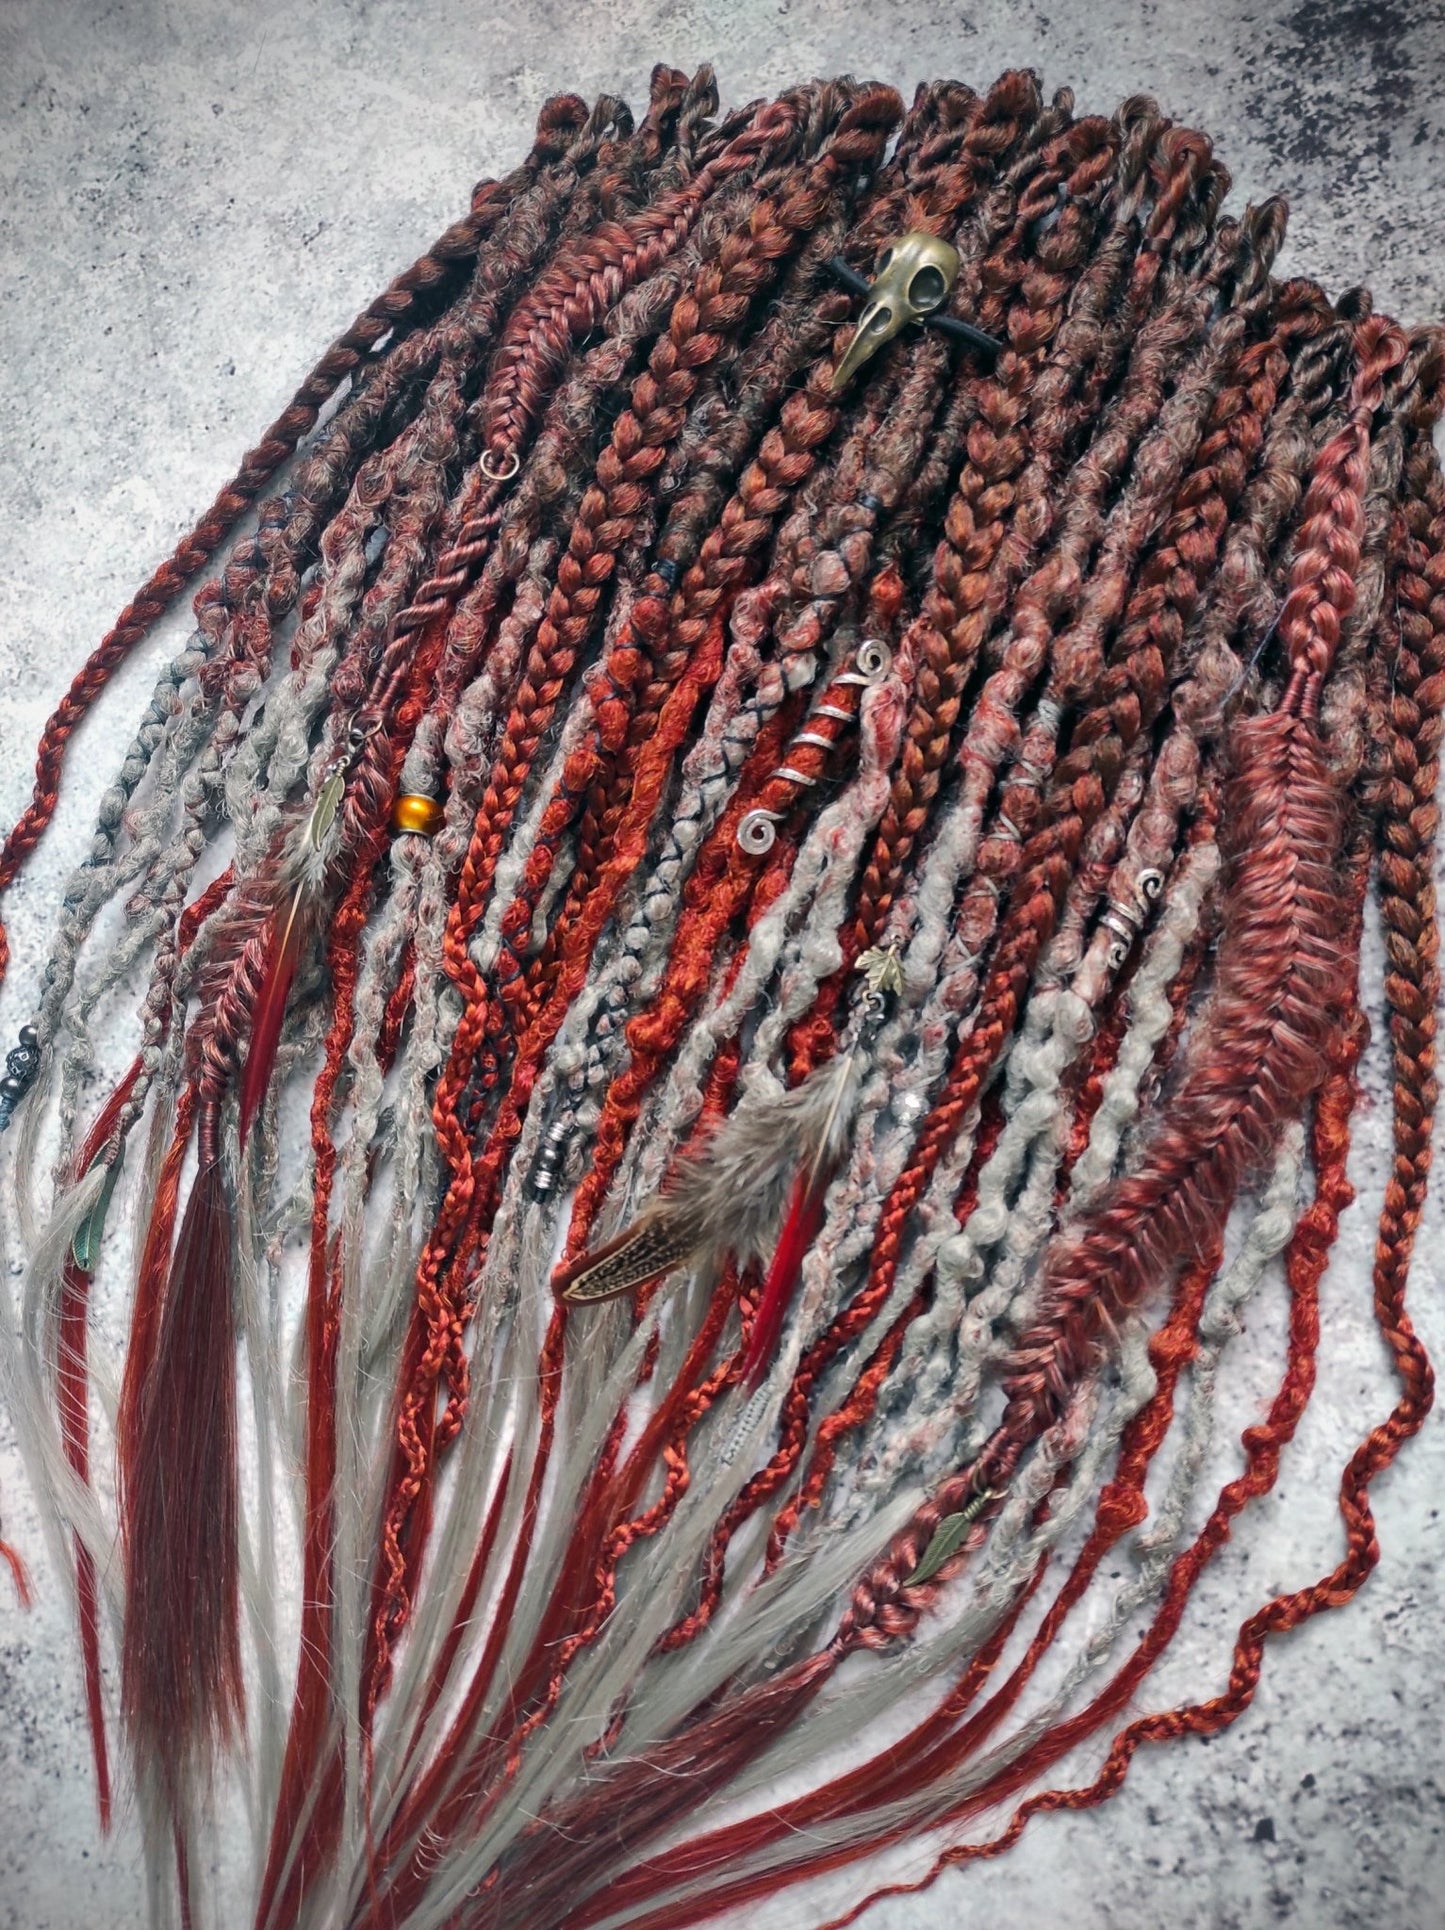 Synthetic dreads featuring a red auburn ombre transitioning to gray, complemented by braids